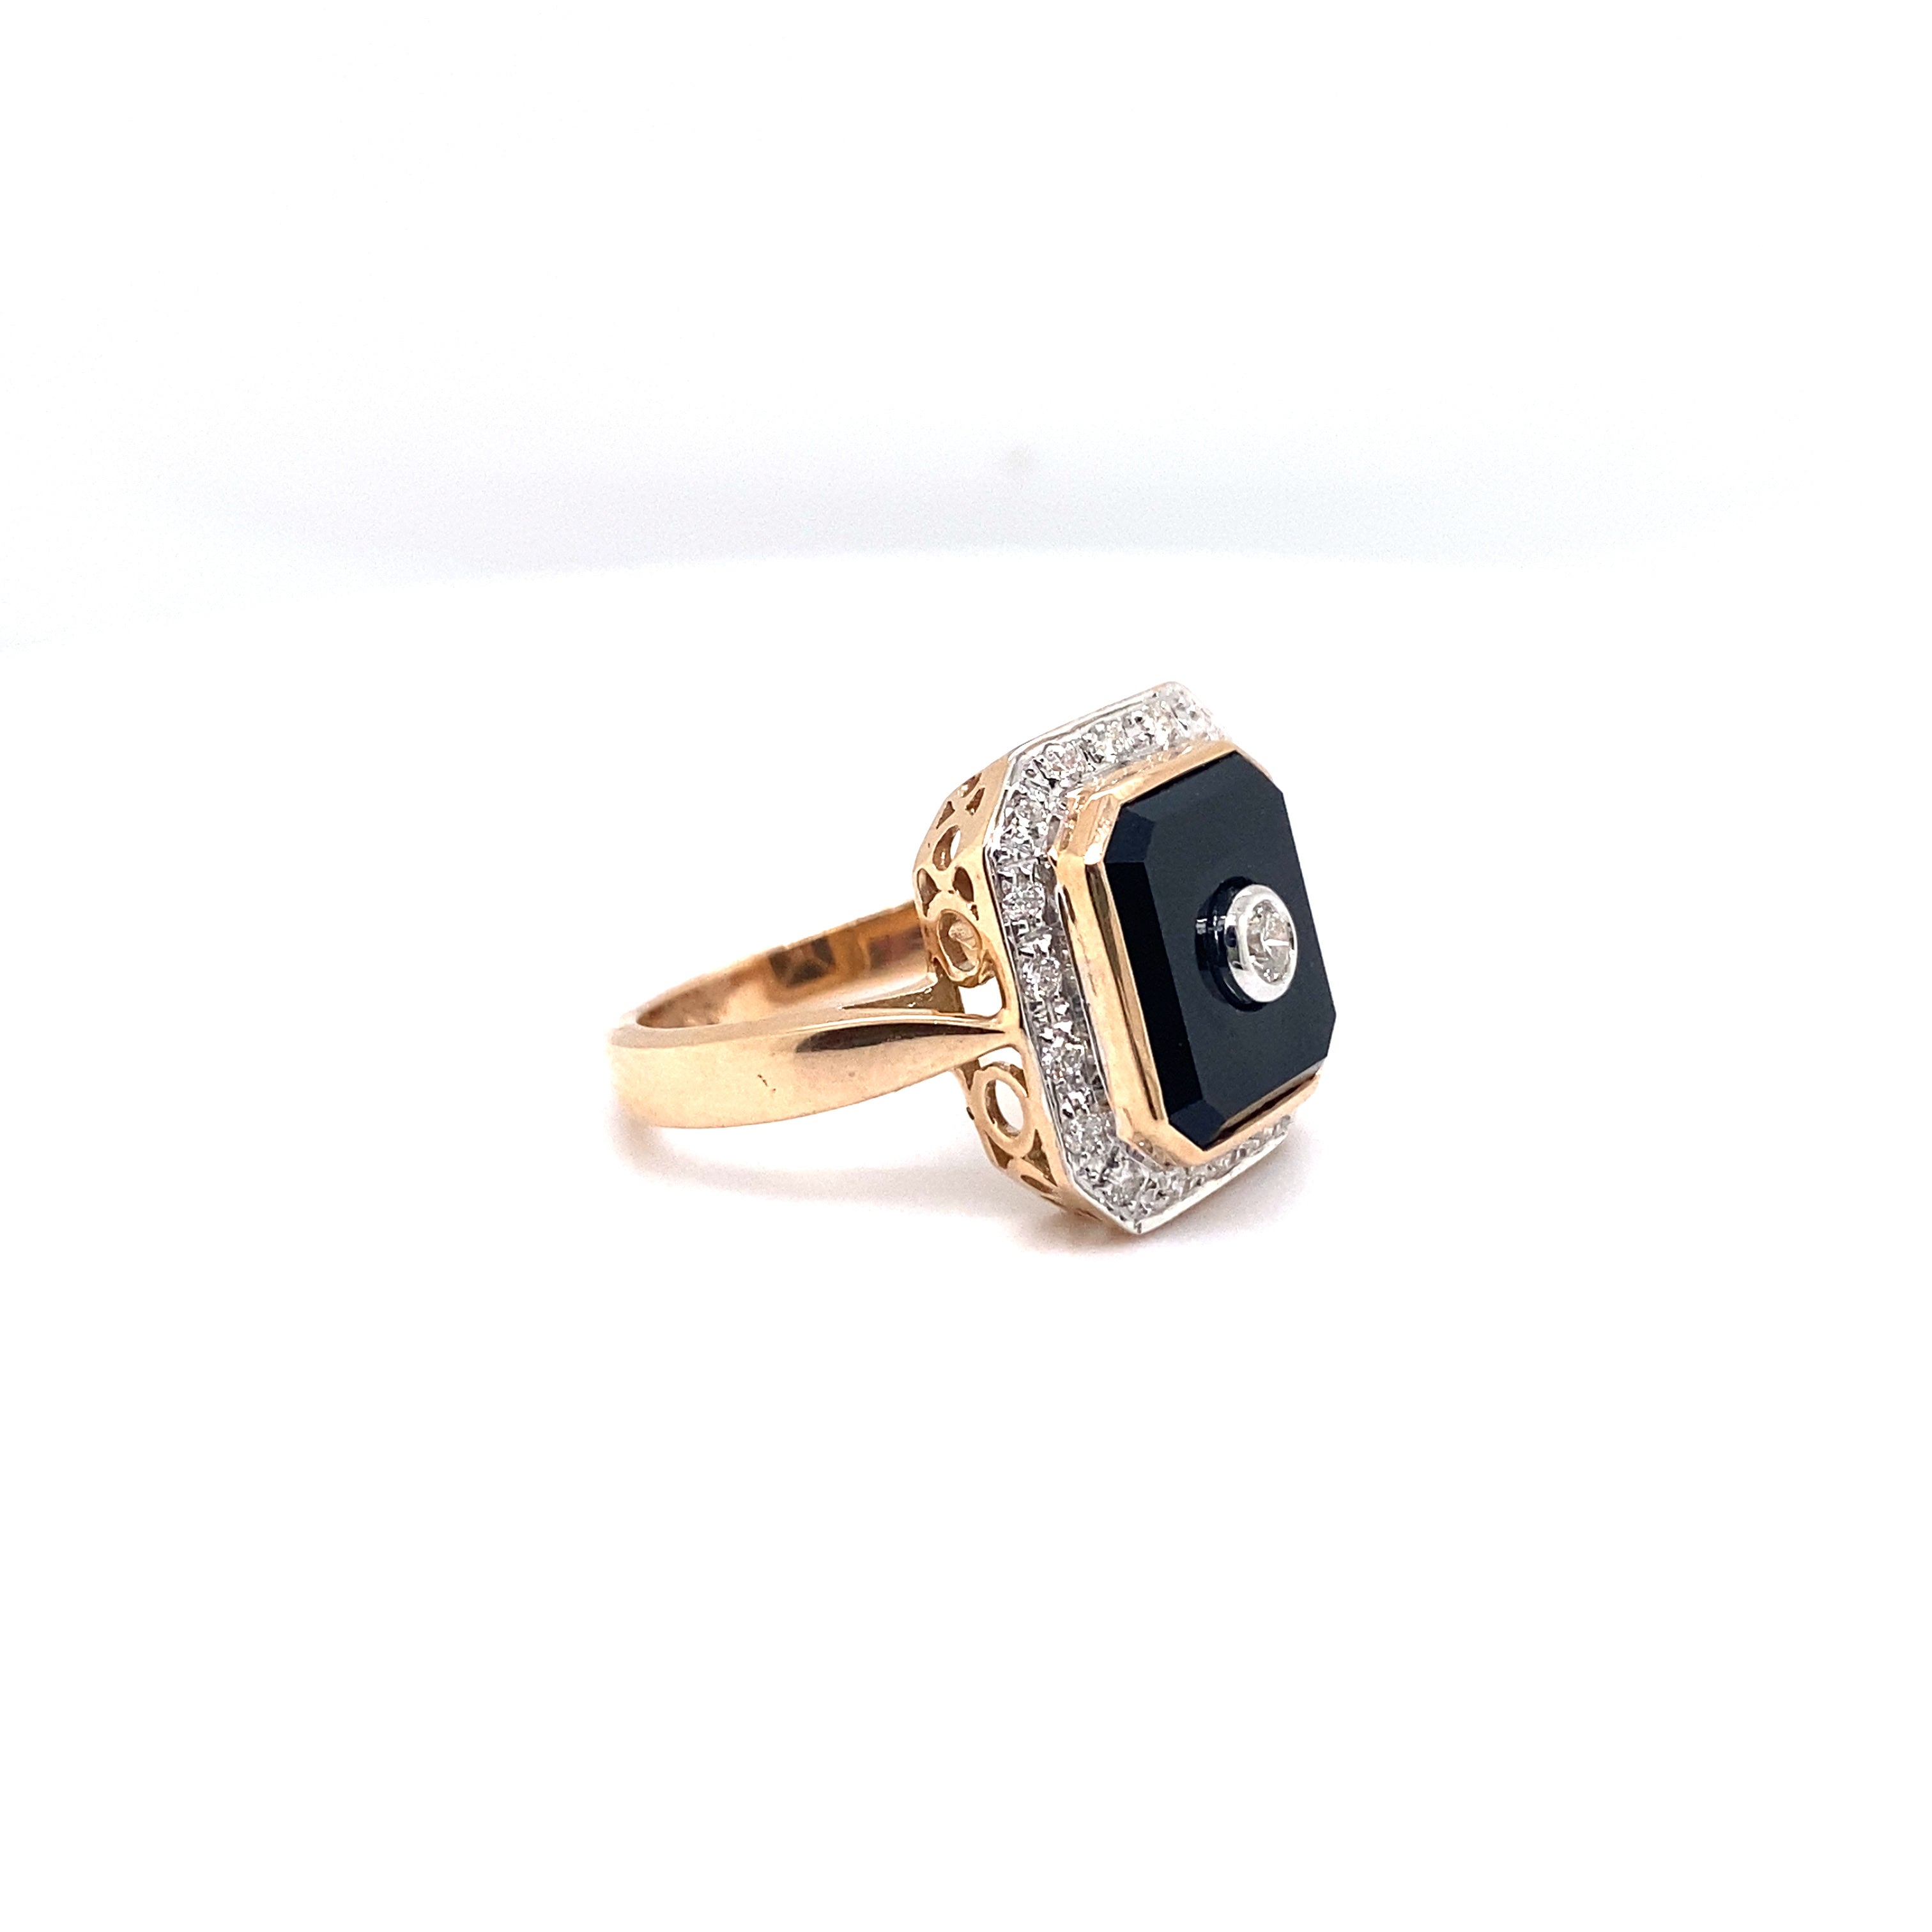 9ct Rose Gold Onyx and Diamond Ring.